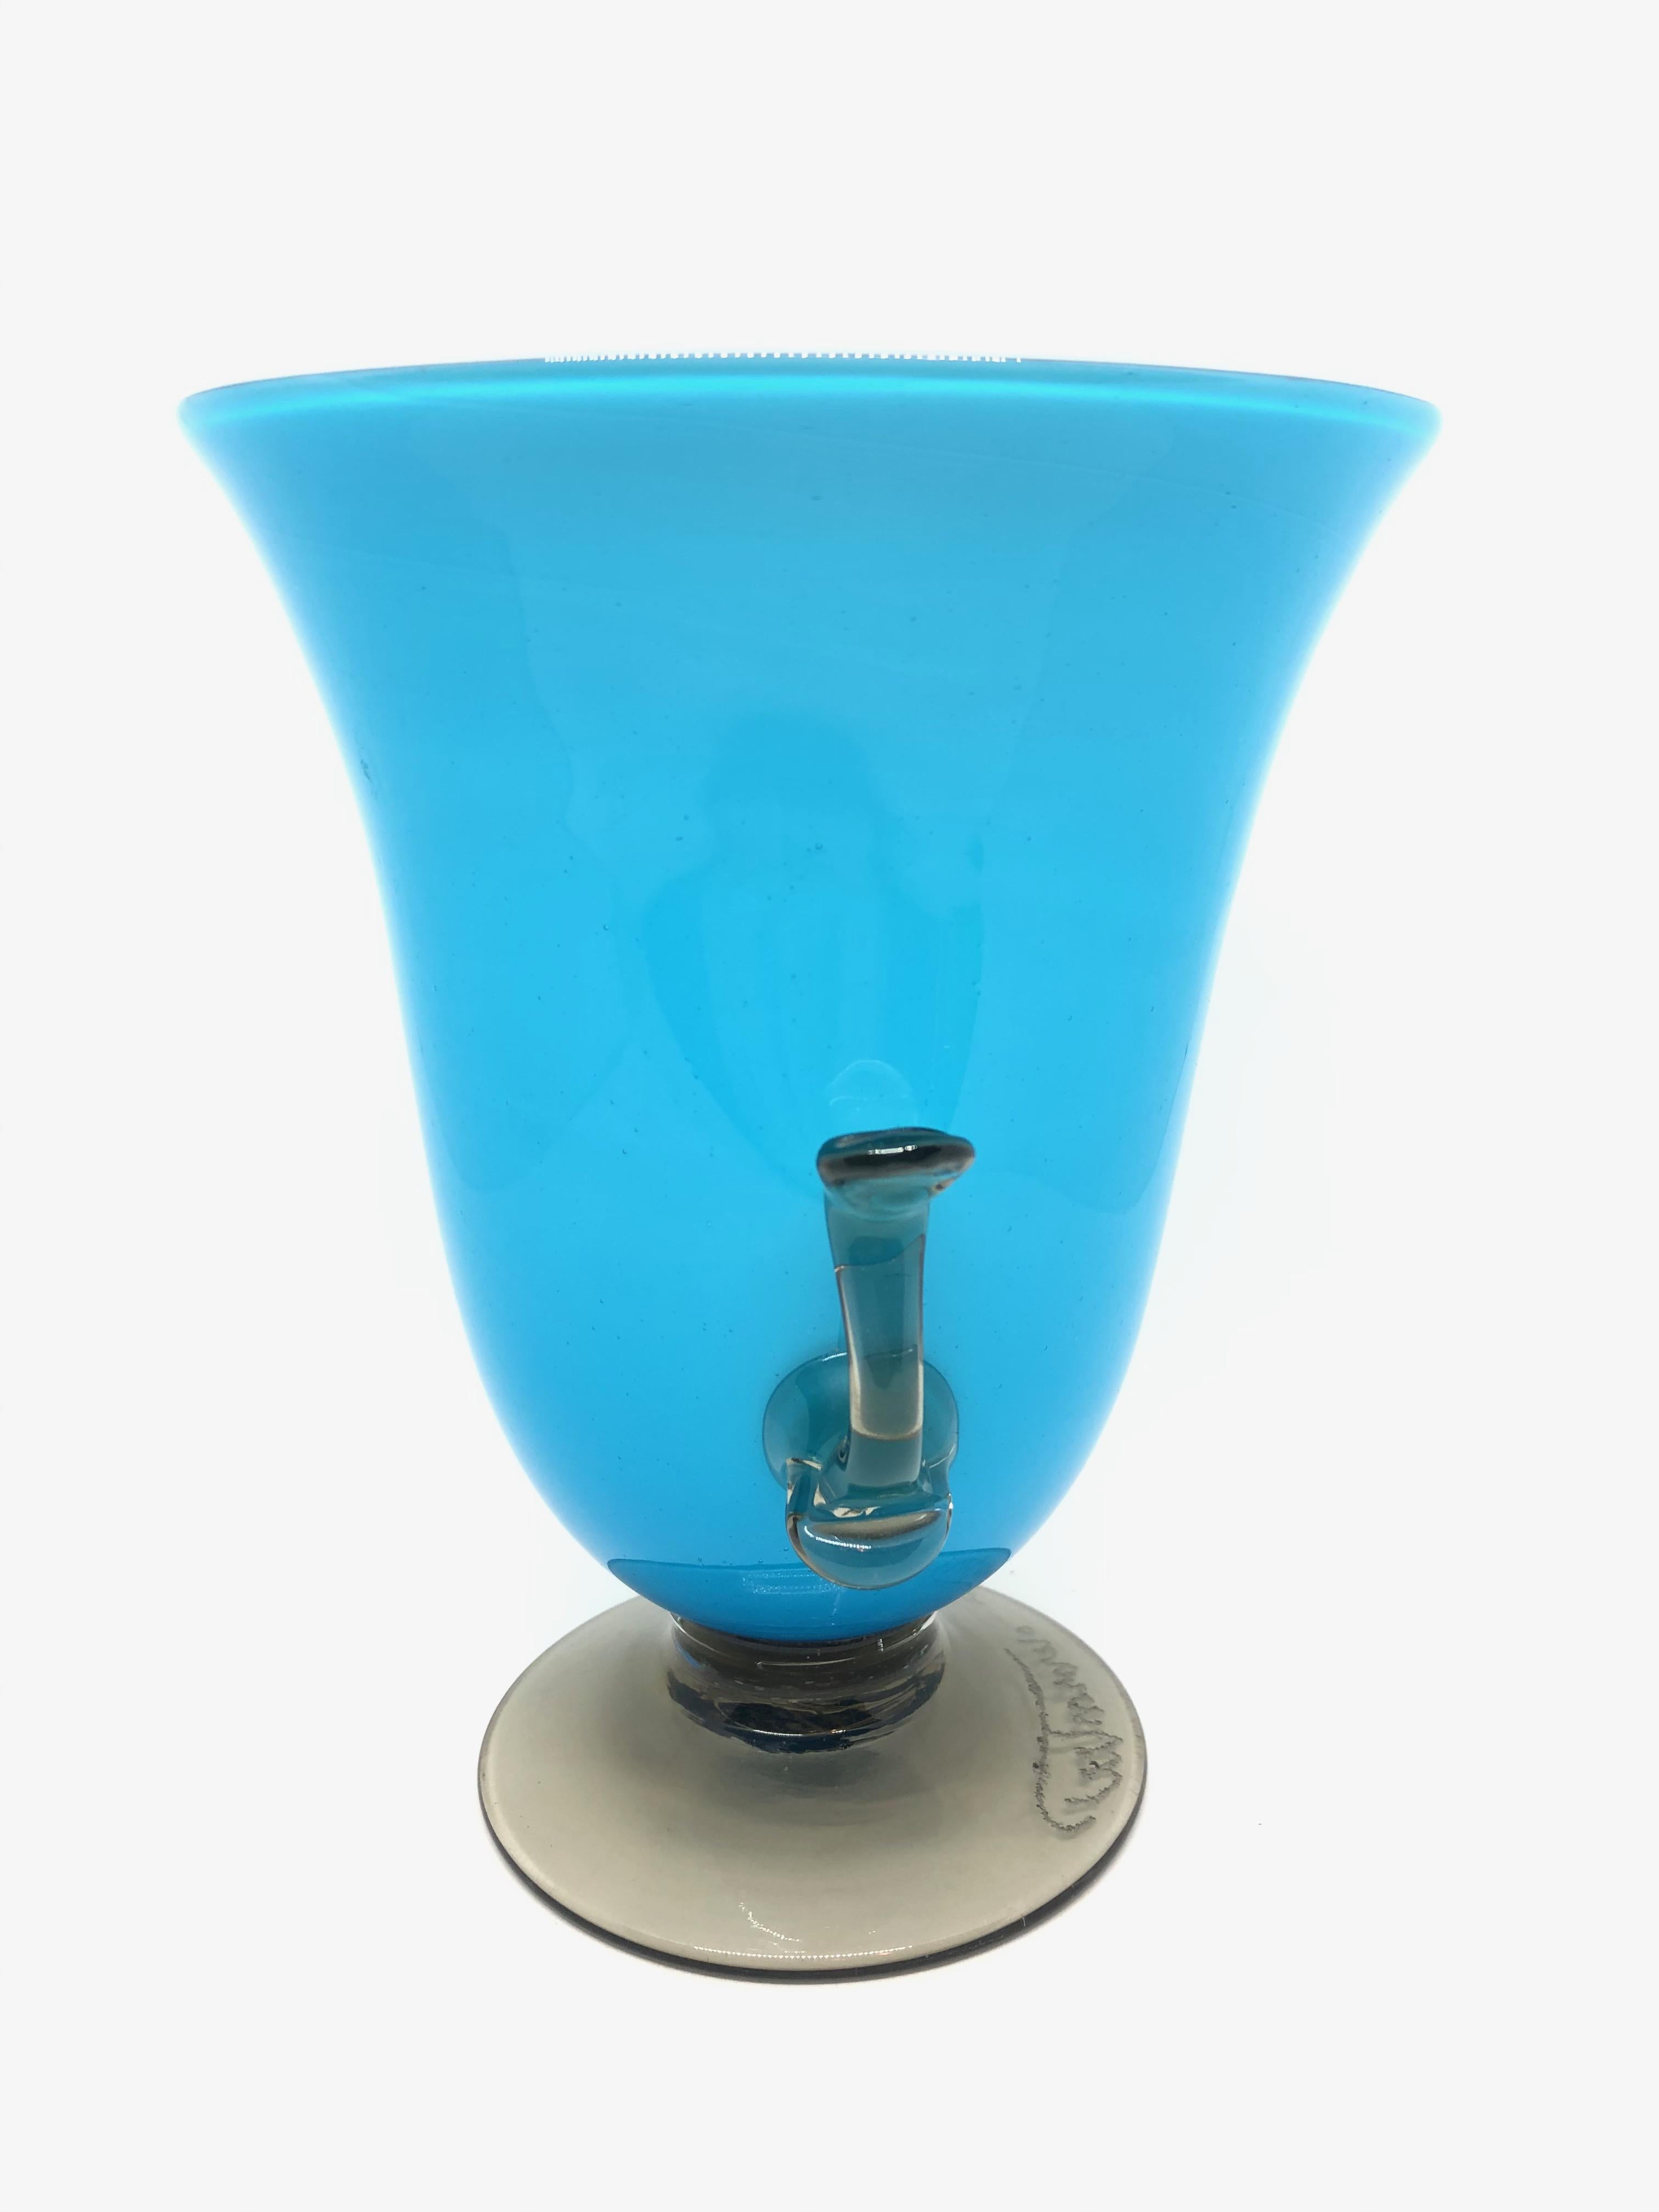 Beautiful Murano hand blown Italian art glass vase. Created by Roberto Rossi (signed). Blue on the outside, white glass on the inside, handles and foot in smoked glass. A beautiful piece of art for any room.